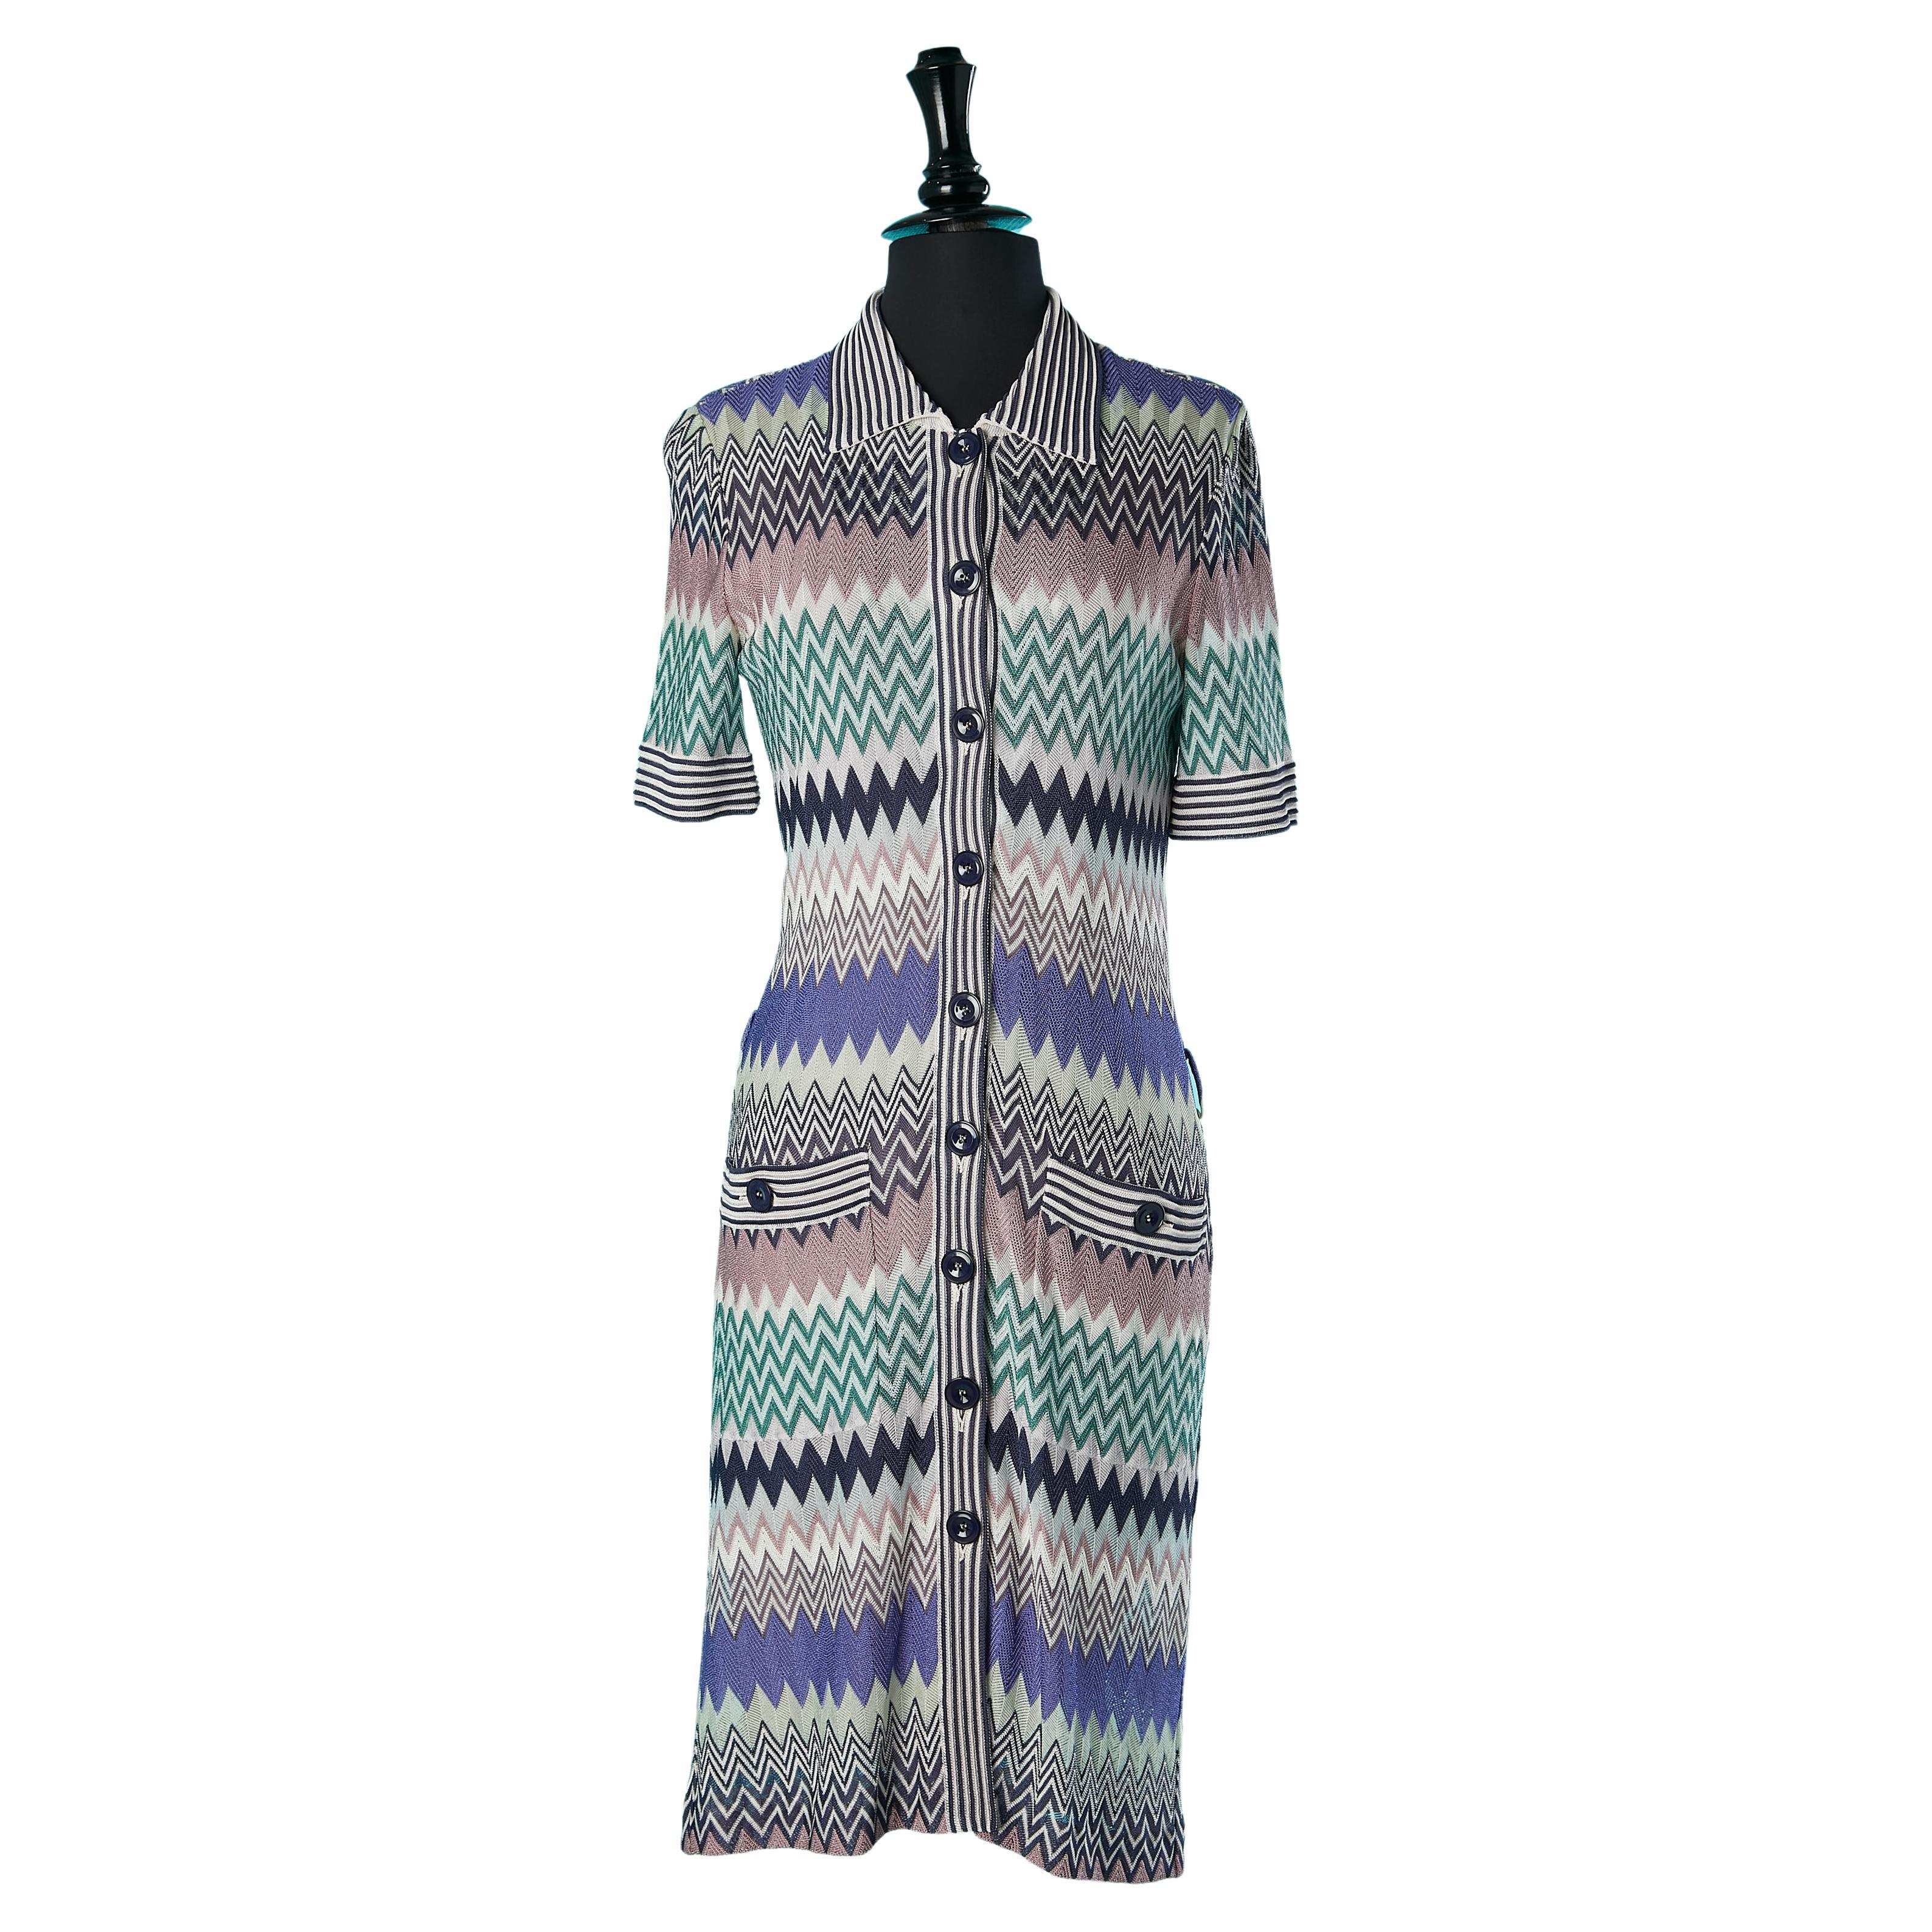 Jacquard knit day dress with graphic pattern Missoni  For Sale